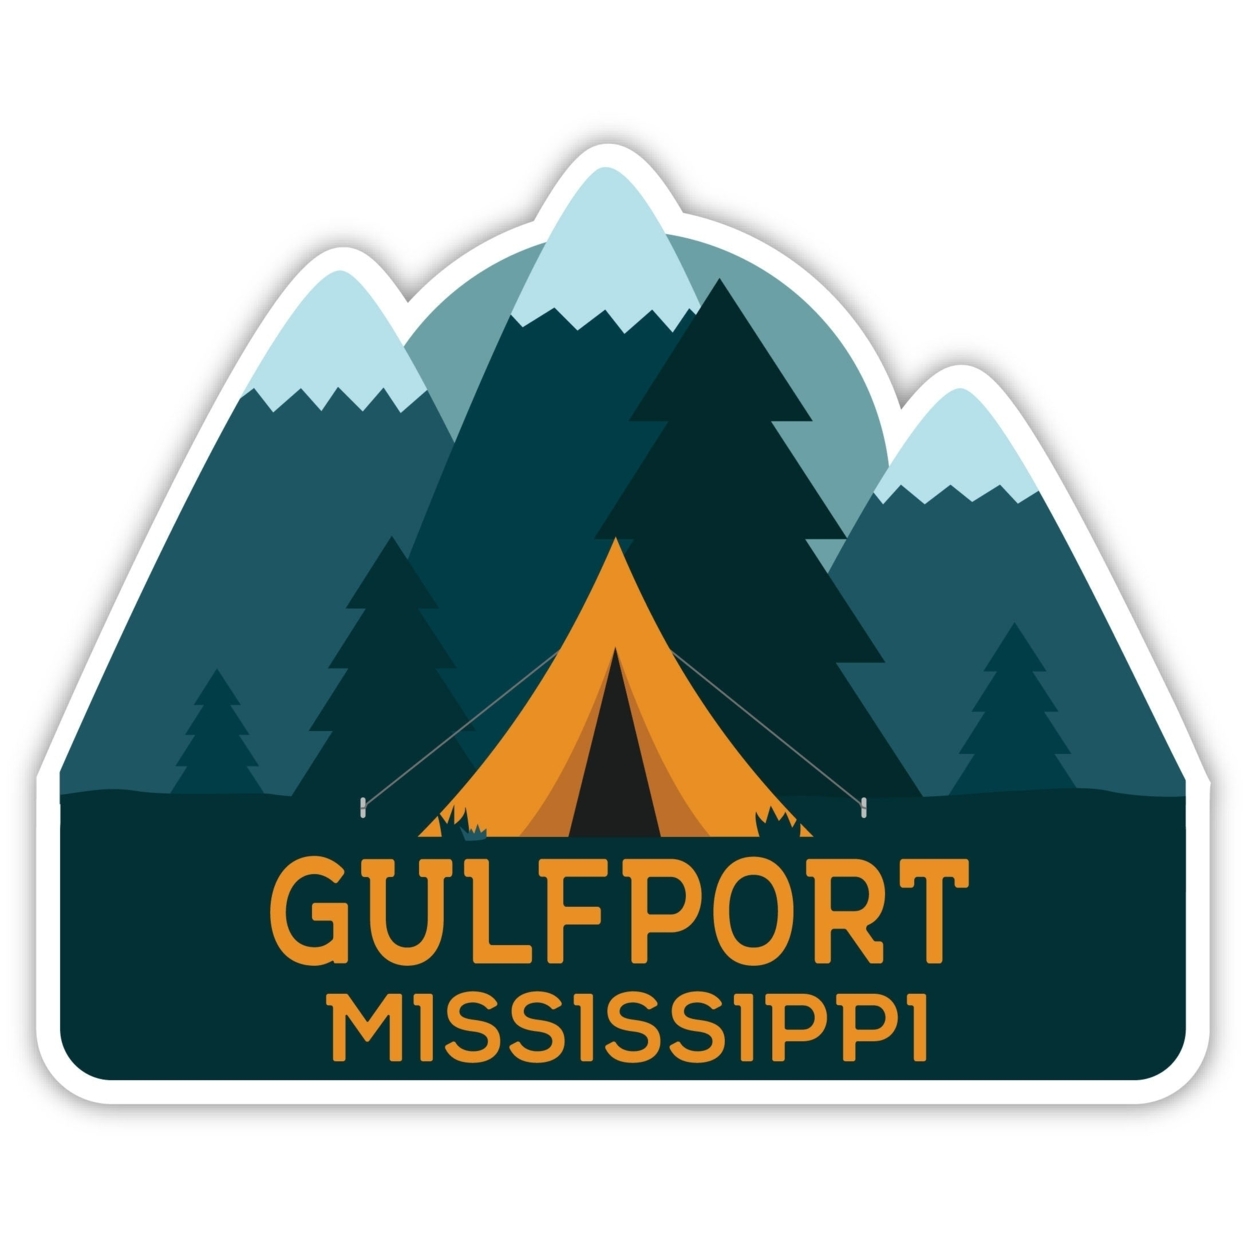 Gulfport Mississippi Souvenir Decorative Stickers (Choose Theme And Size) - 4-Pack, 10-Inch, Camp Life